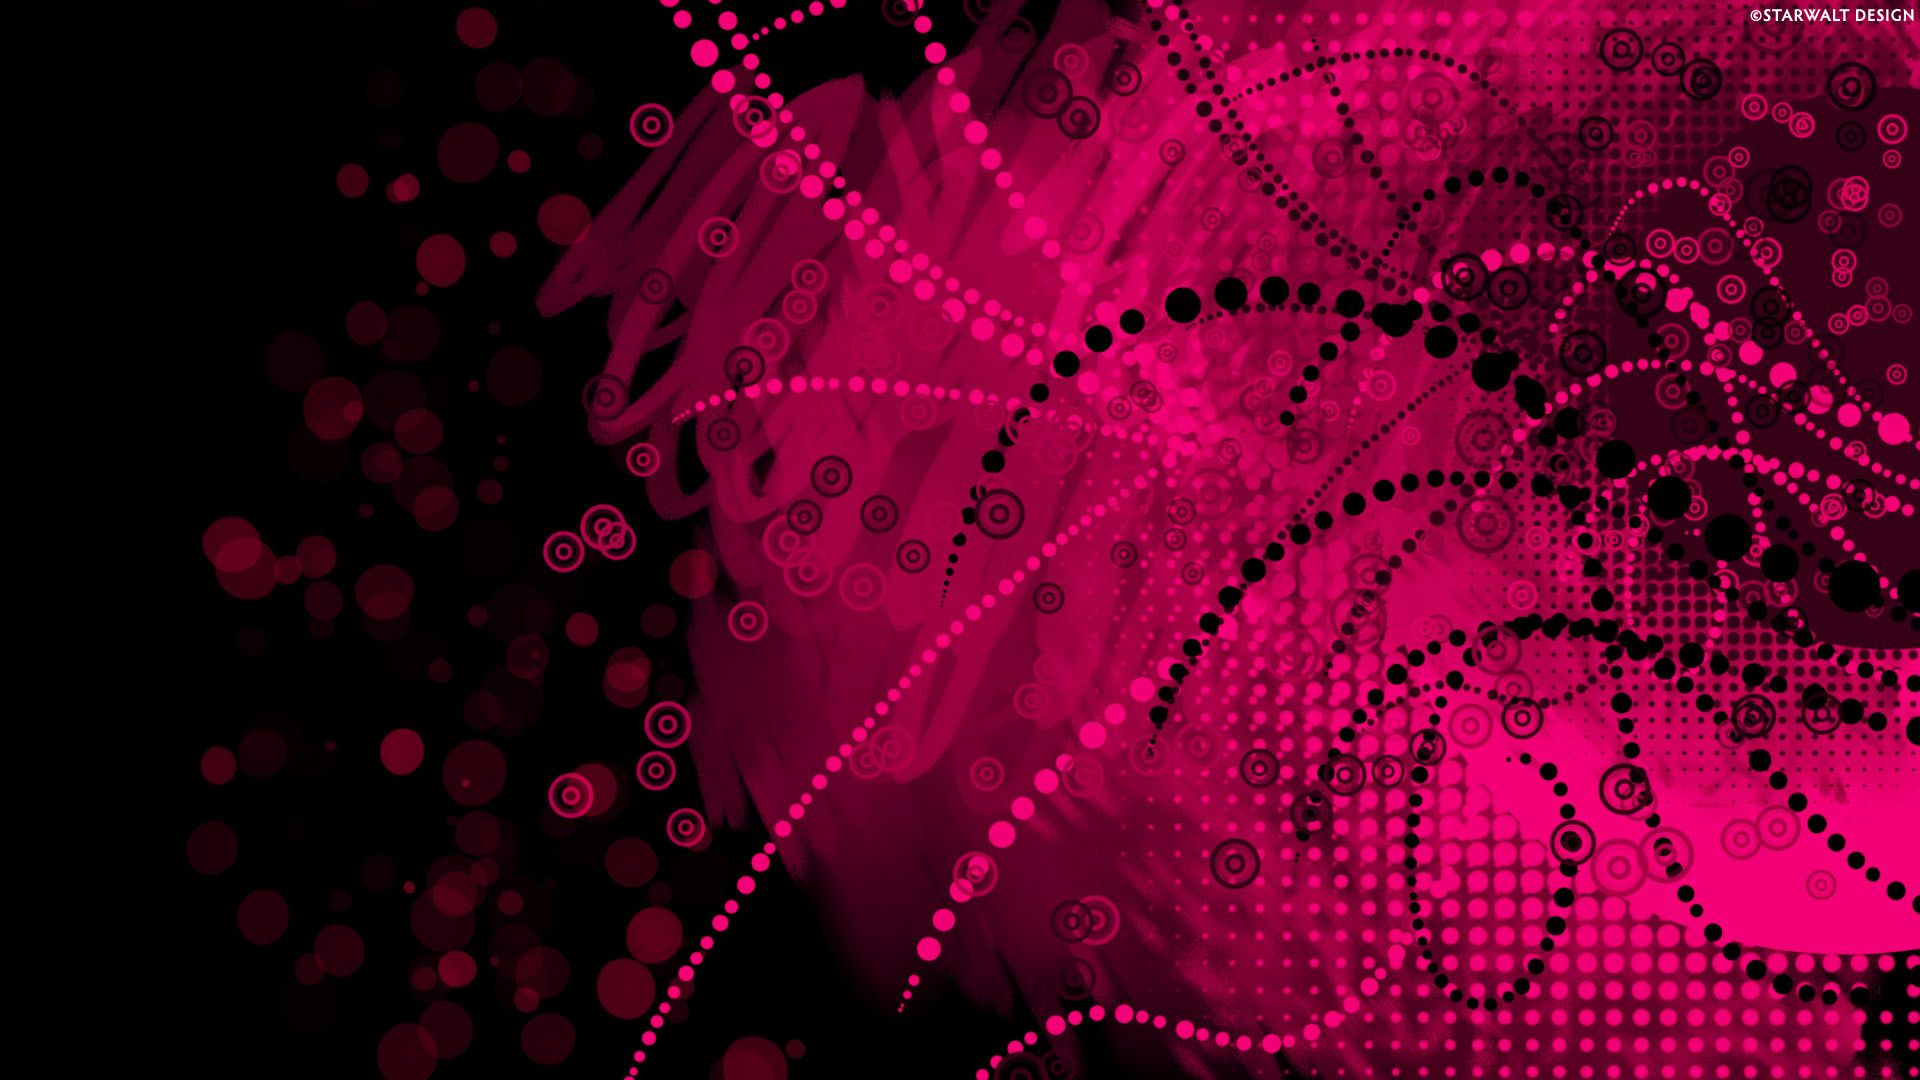 pink colour hd wallpapers